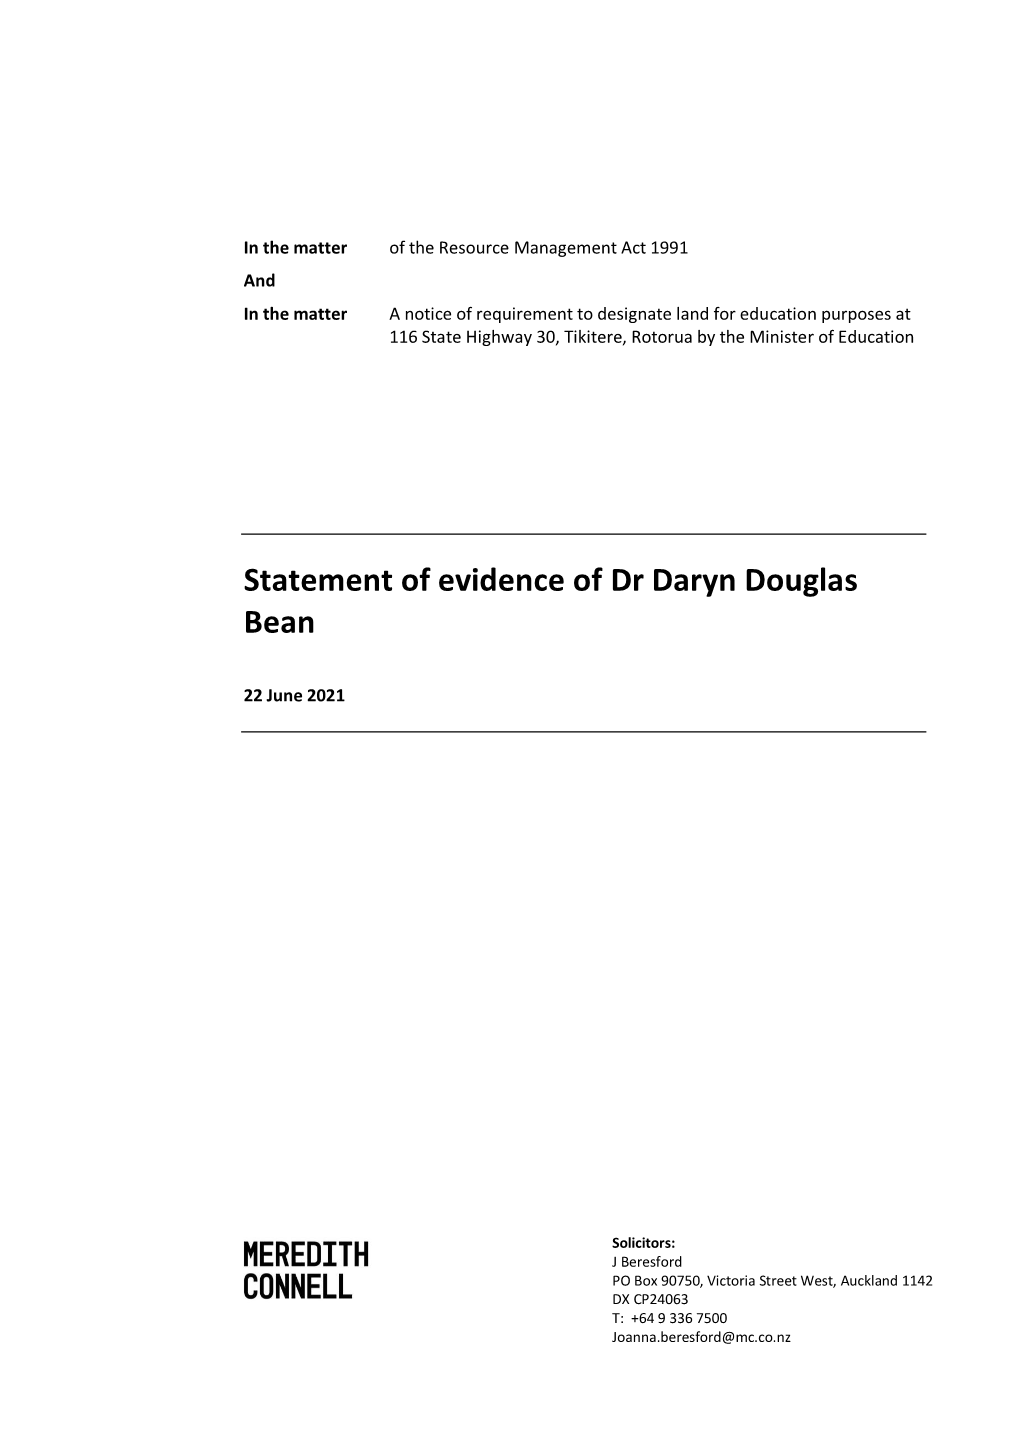 Statement of Evidence of Dr Daryn Douglas Bean